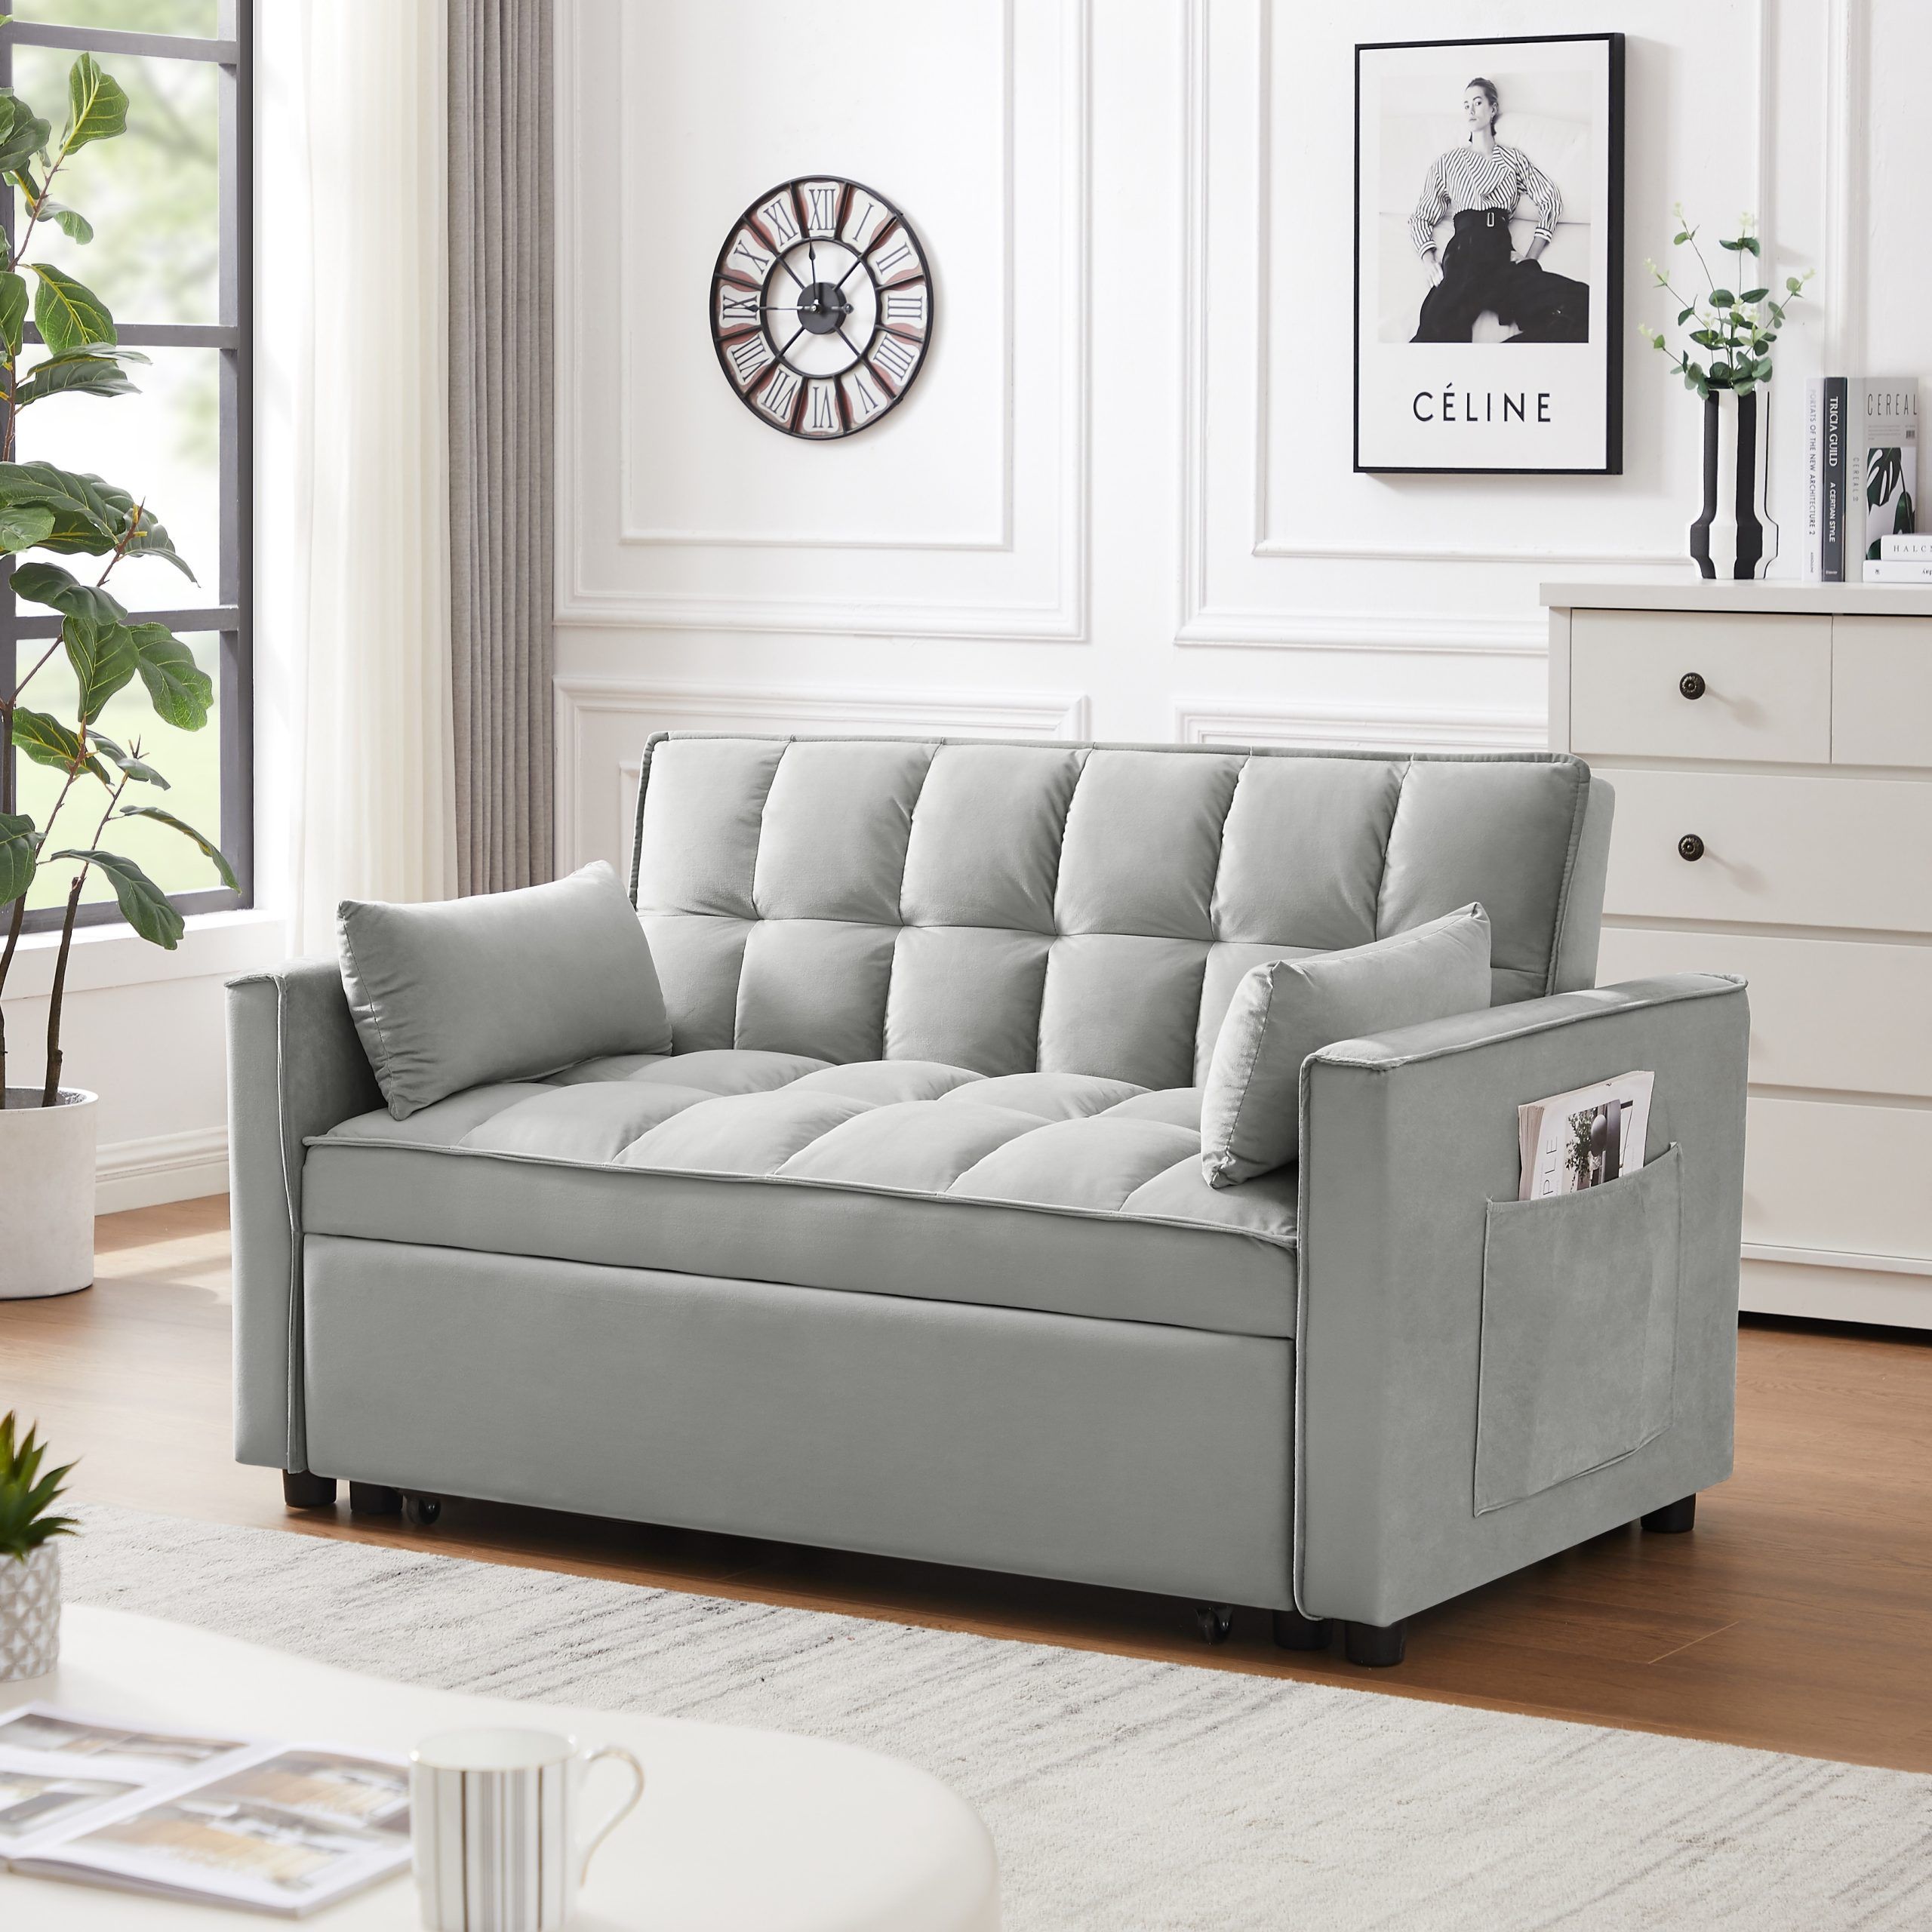 Modern Velvet Loveseat Futon Sofa Couch Pullout Bed, Small Love Seat Lounge  Sofa ,3 In 1 Convertible Sleeper Sofa Bed – On Sale – Bed Bath & Beyond –  37210259 Intended For Small Love Seats In Velvet (View 14 of 15)